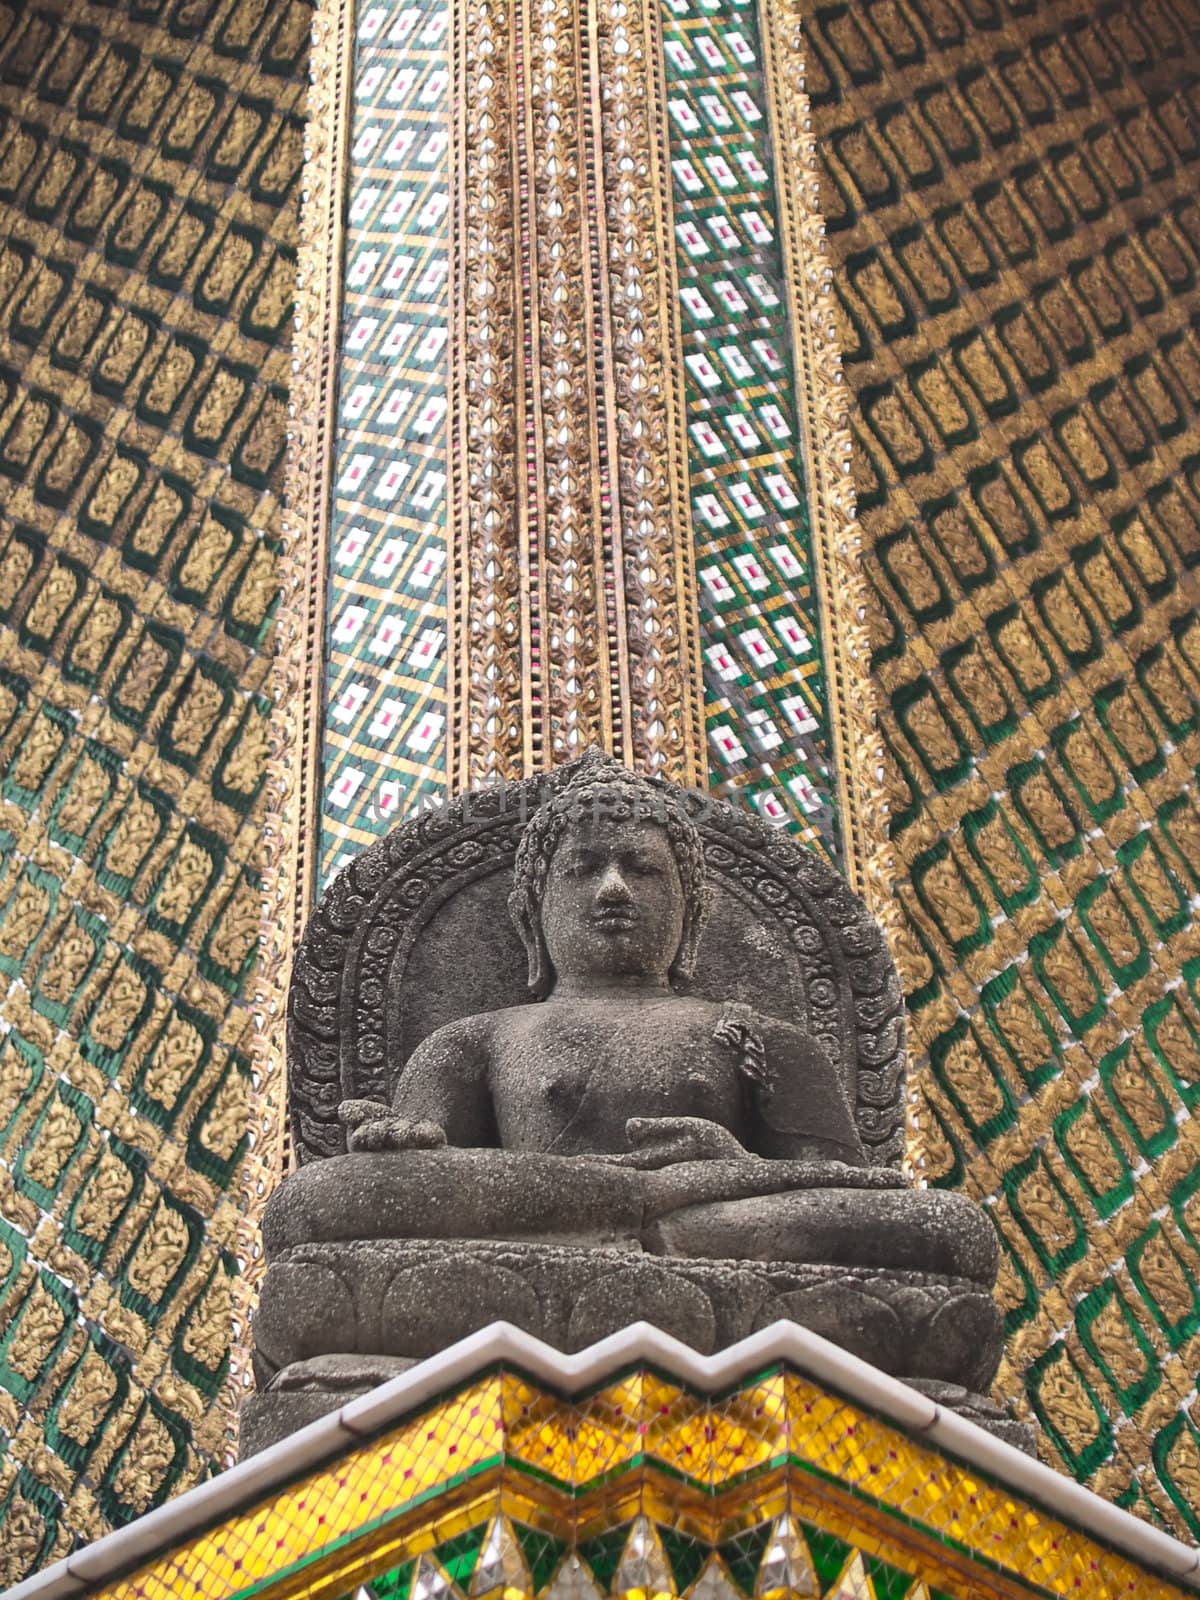 Dhyani Buddhas in front of The Royal Pantheon in Temple of The Emerald Buddha (Wat Phra Kaew), Bangkok, Thailand